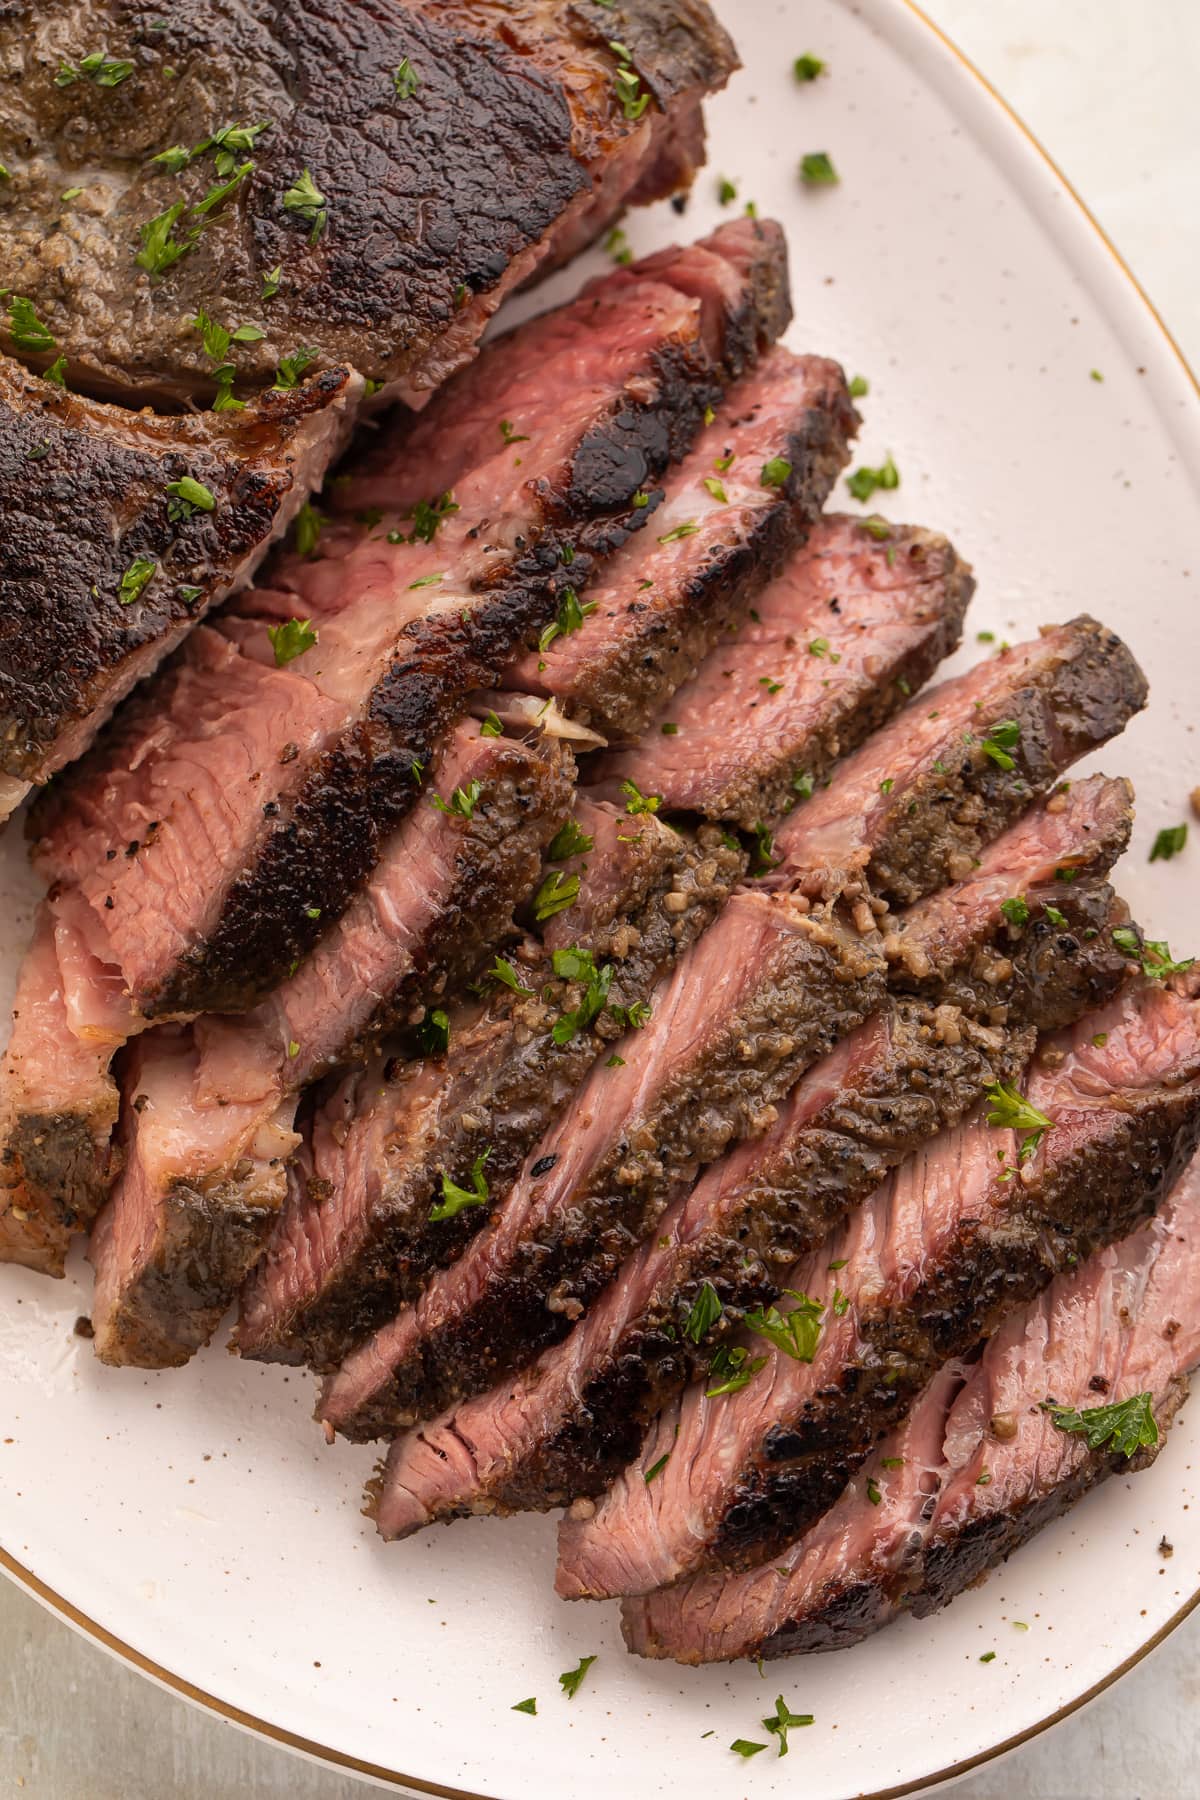 Overhead photo of sous vide chuck roast on a white platter, with half the chuck roast sliced into thin strips and fanned out to show the crust and the inside of the roast.